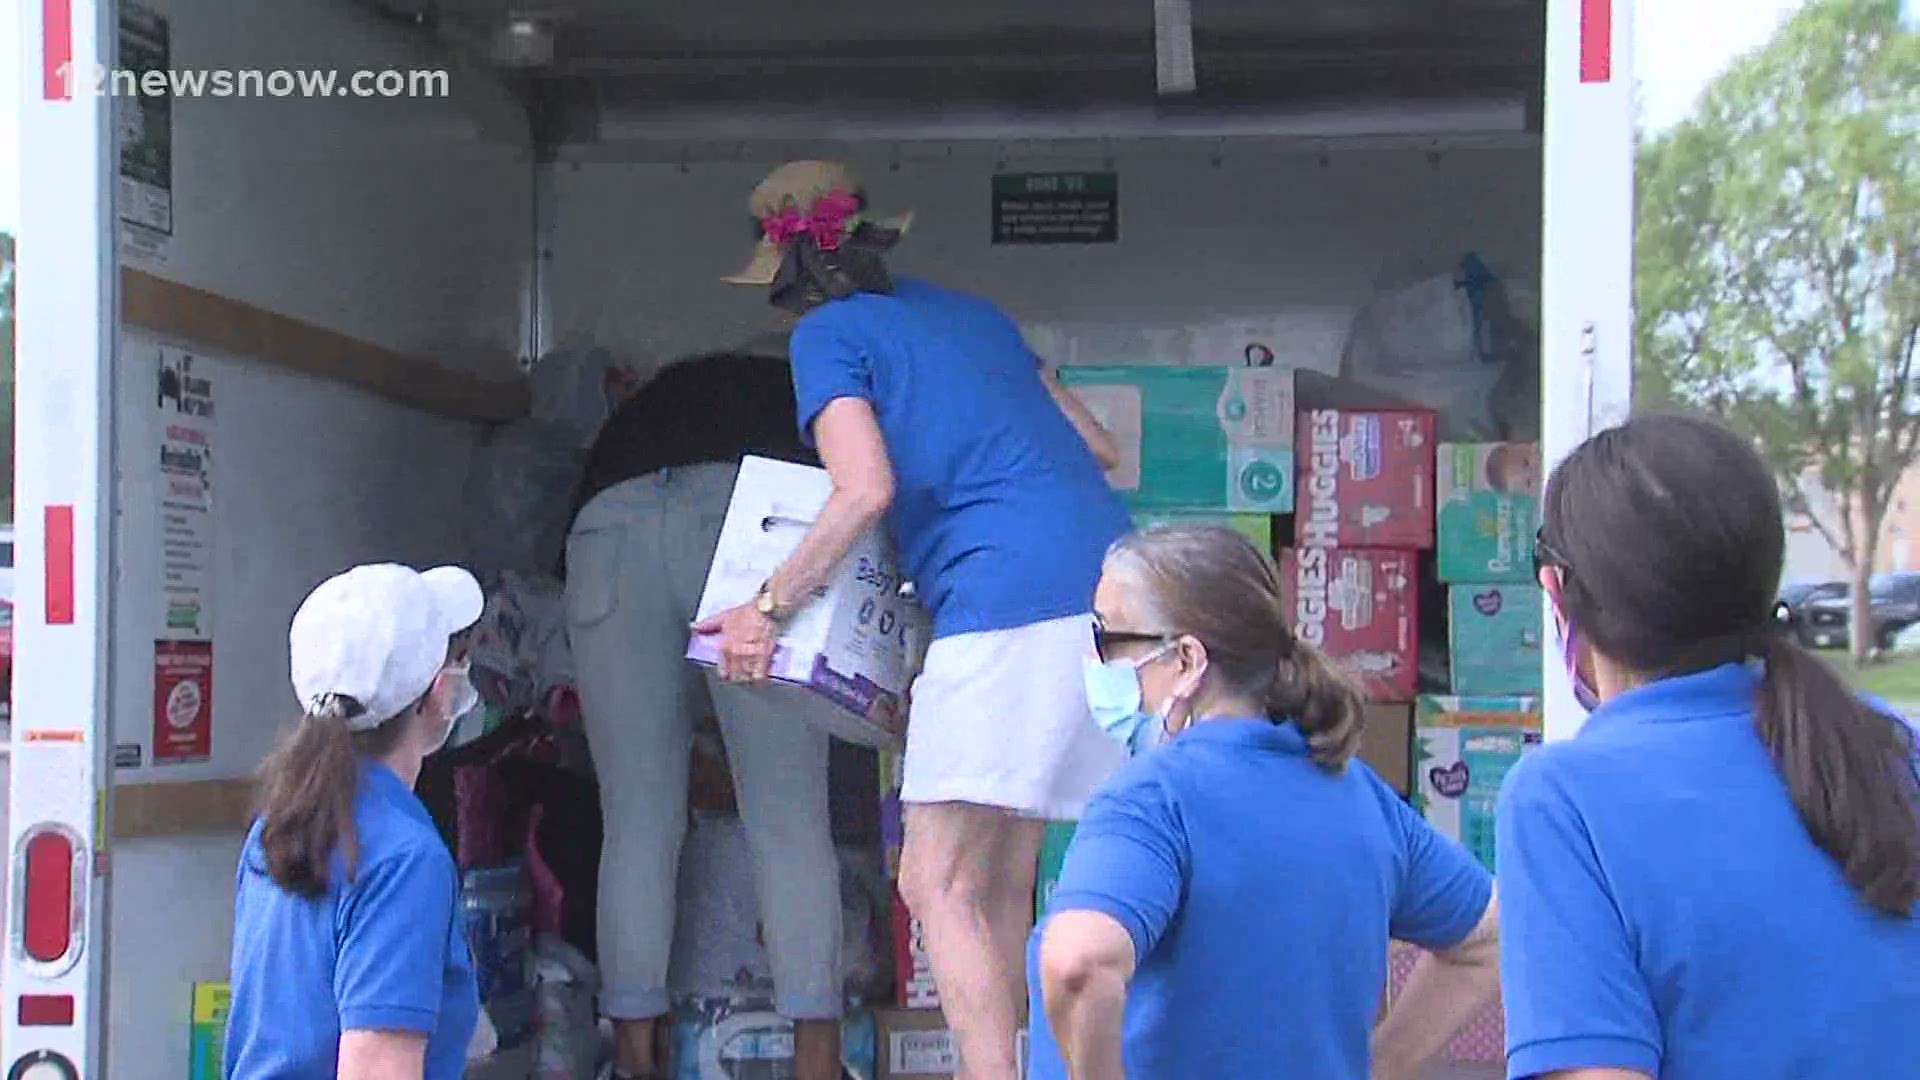 Hurricane Laura left thousands without power and with damaged or destroyed homes. Southeast Texas is giving back to those people by donating diapers, wipes